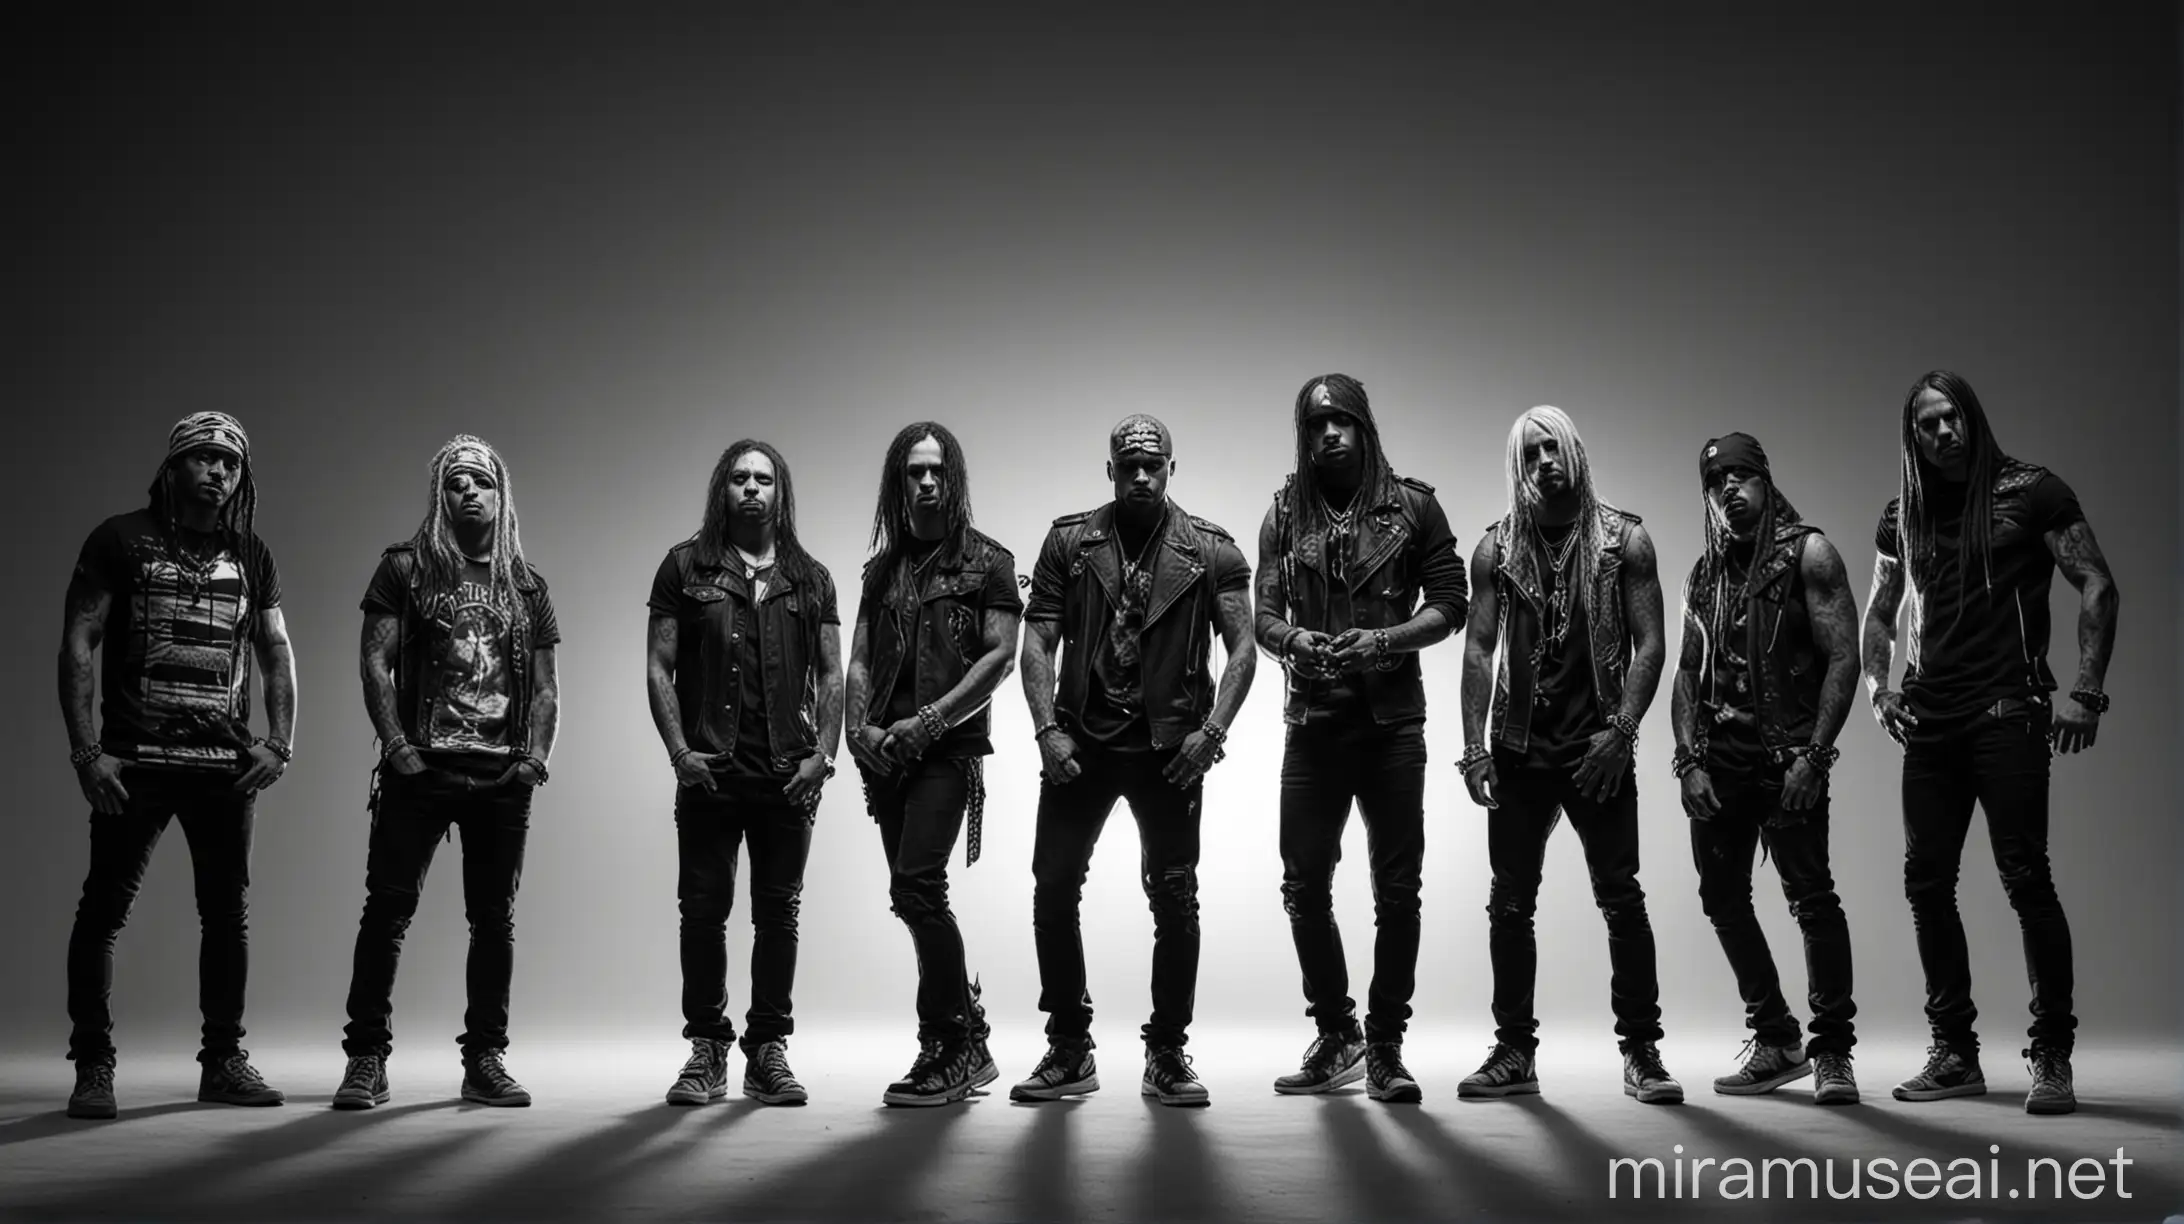 Monochrome Wallpaper Featuring D12 Band in 4K Resolution